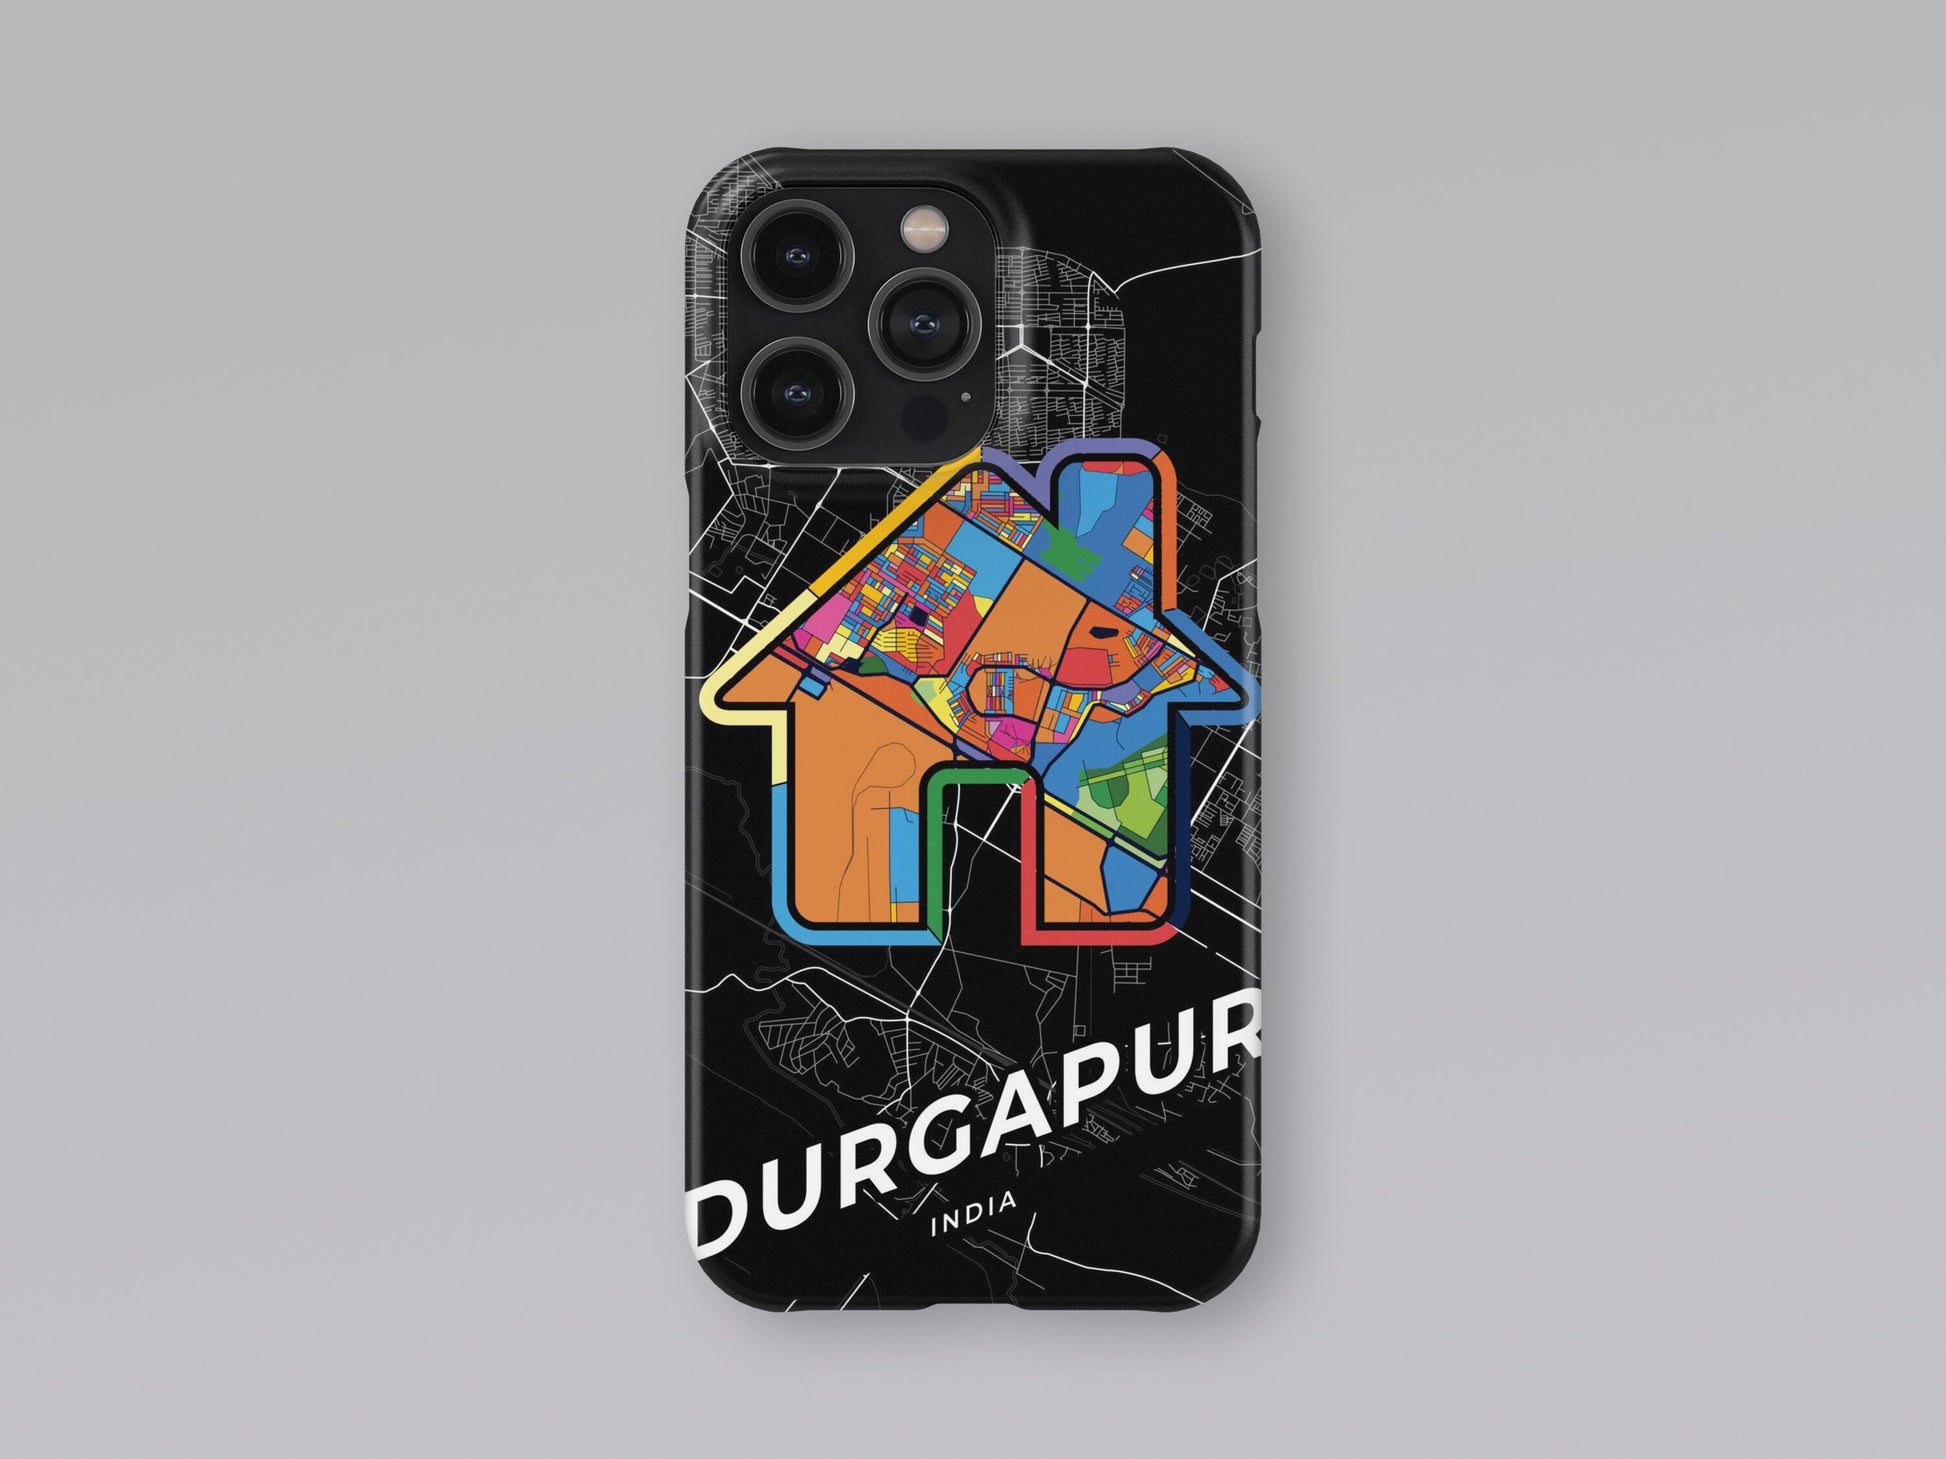 Durgapur India slim phone case with colorful icon. Birthday, wedding or housewarming gift. Couple match cases. 3